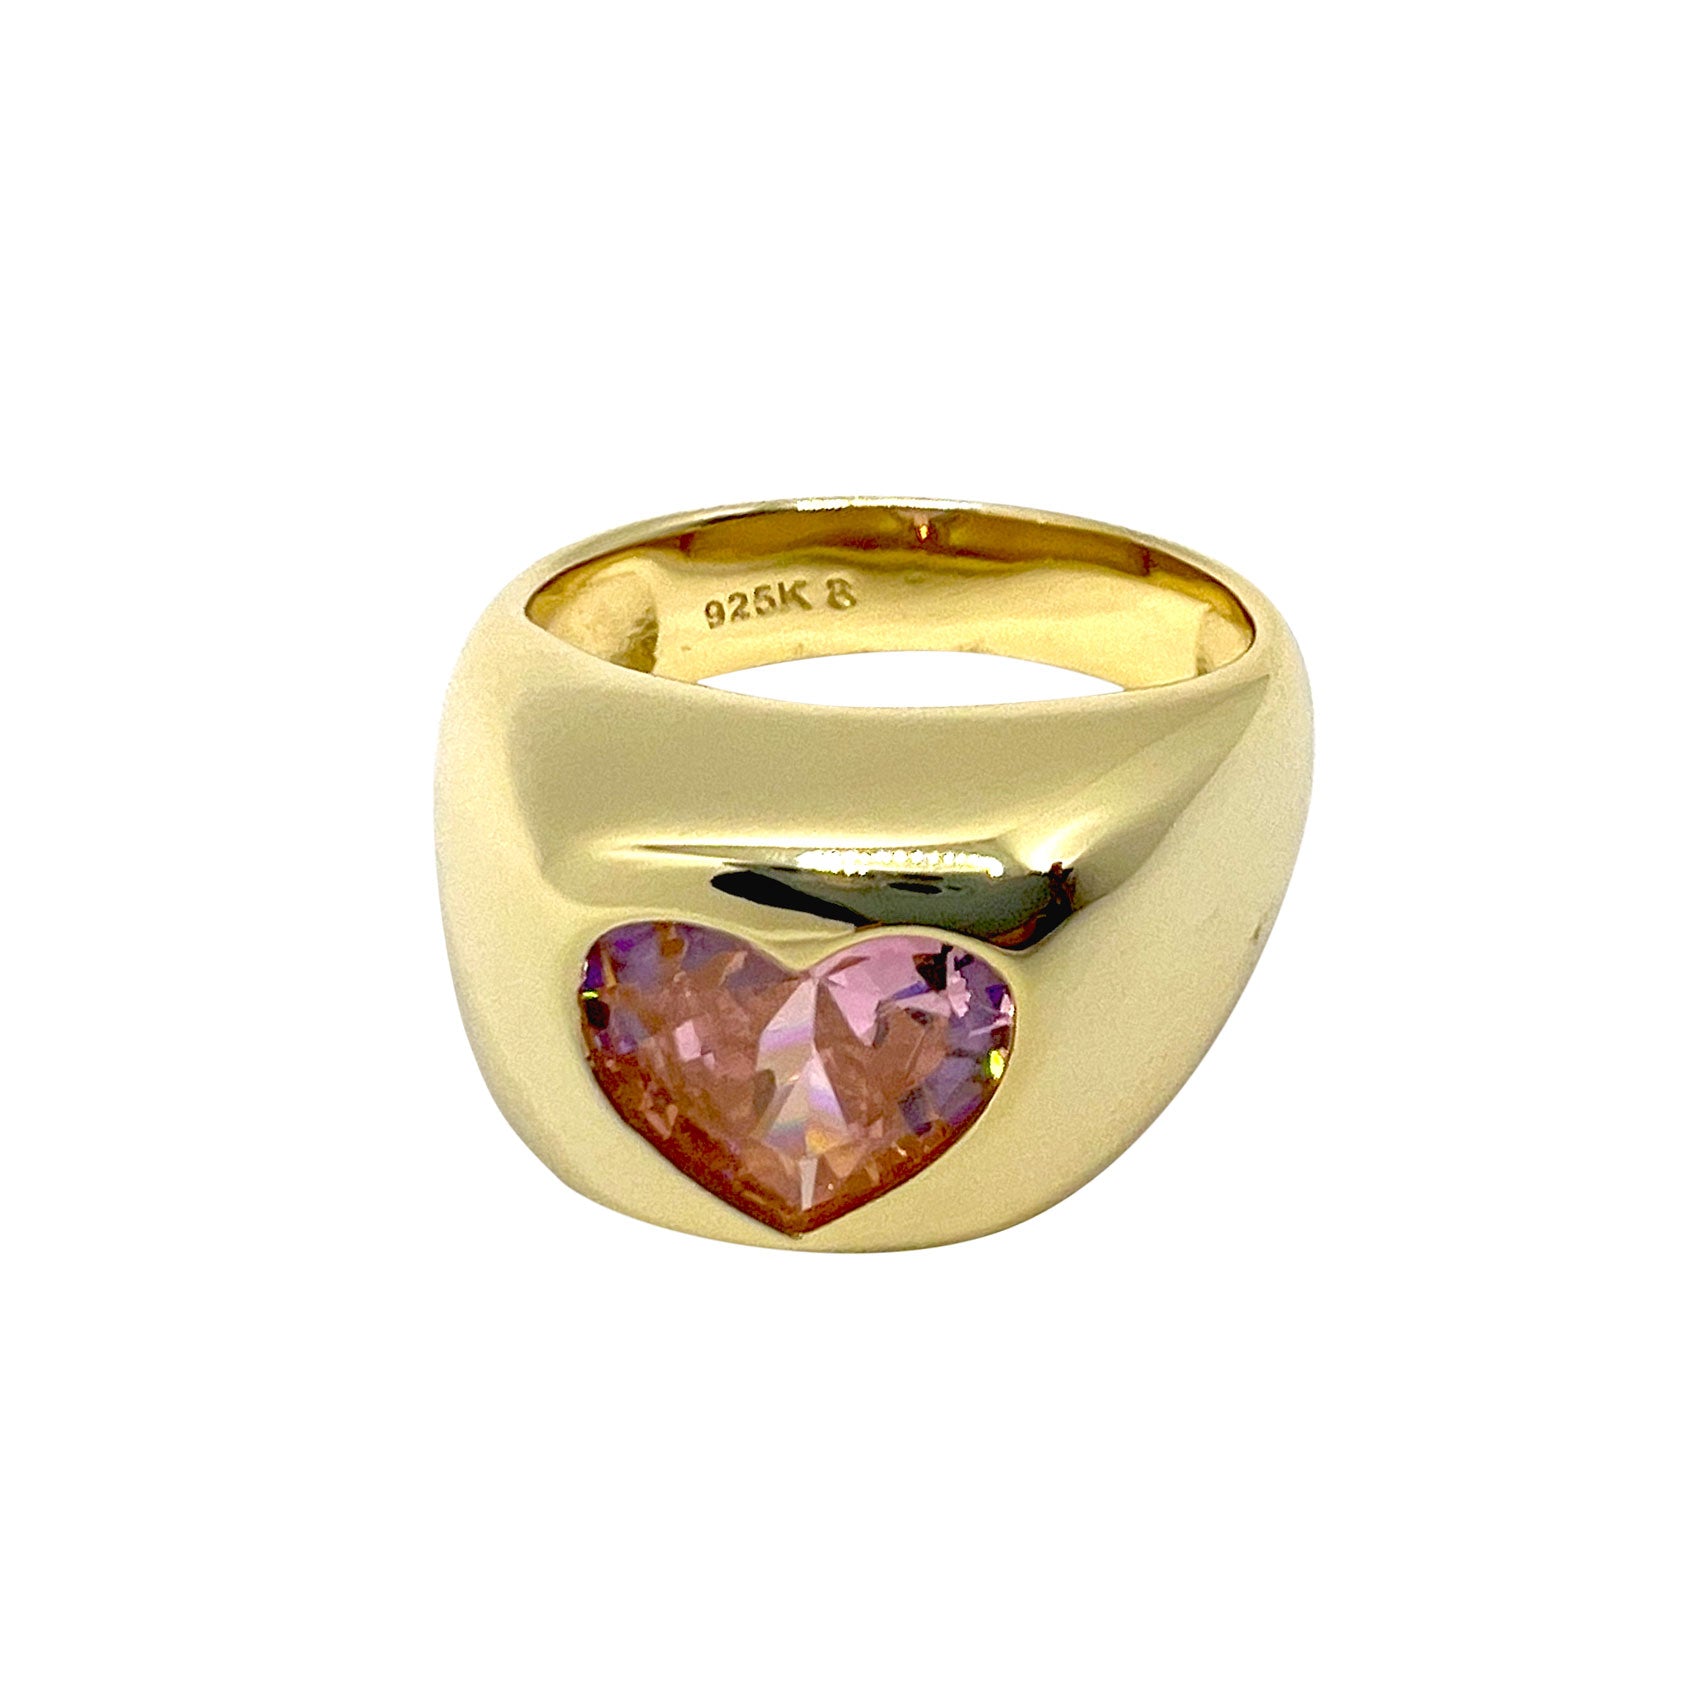 Gold Pink Heart Ring